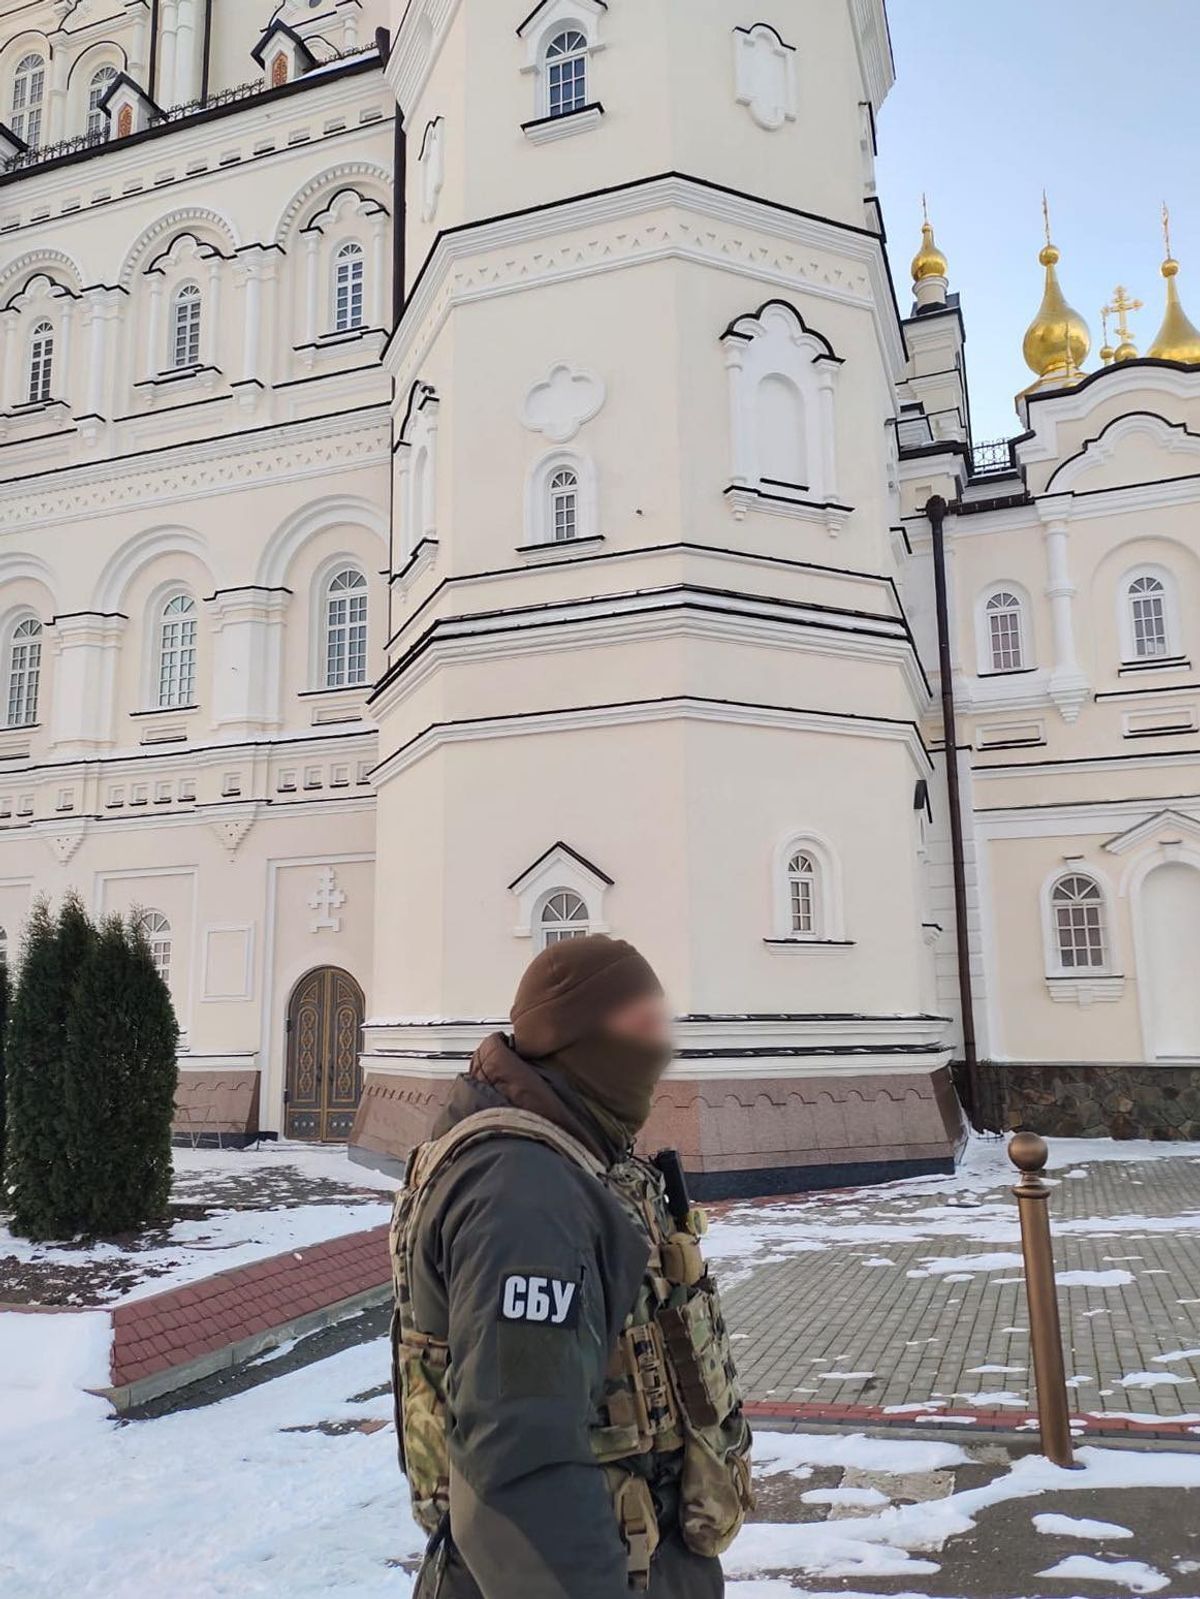 The preliminary reason for the SBU’s visit is the dissemination of Russian ideology by representatives of the Lavra